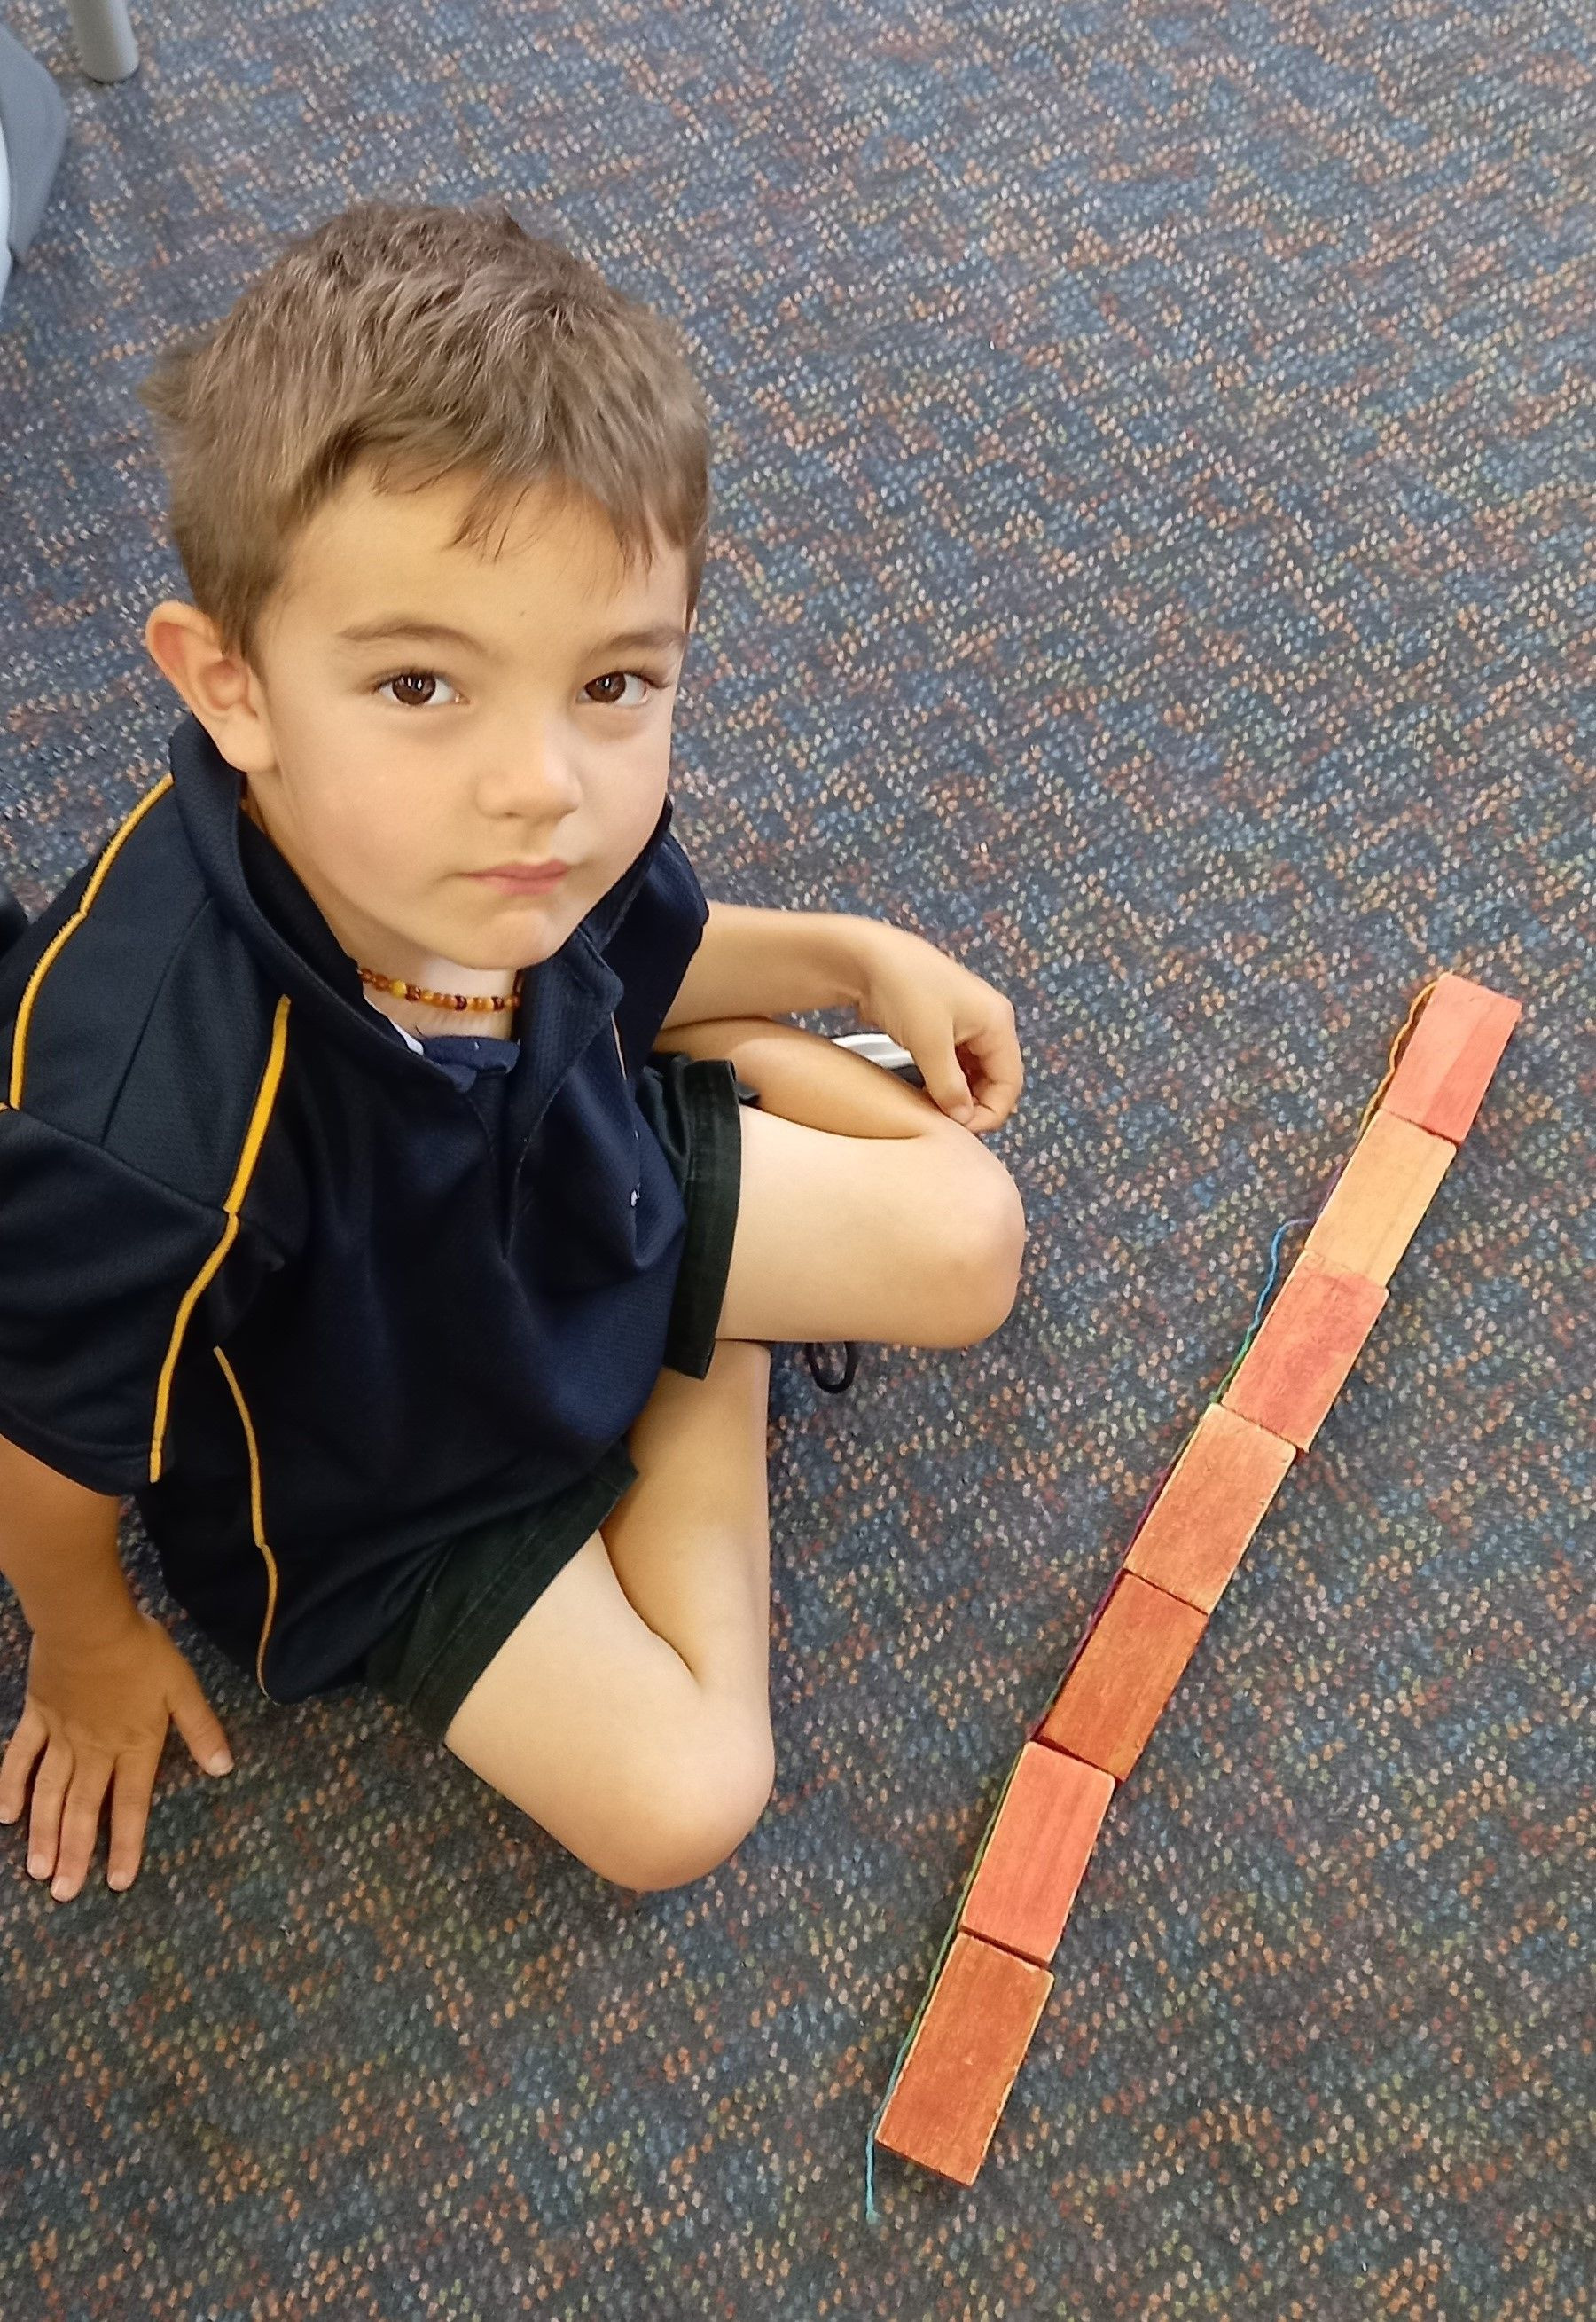 Room 1 learns all about measurement